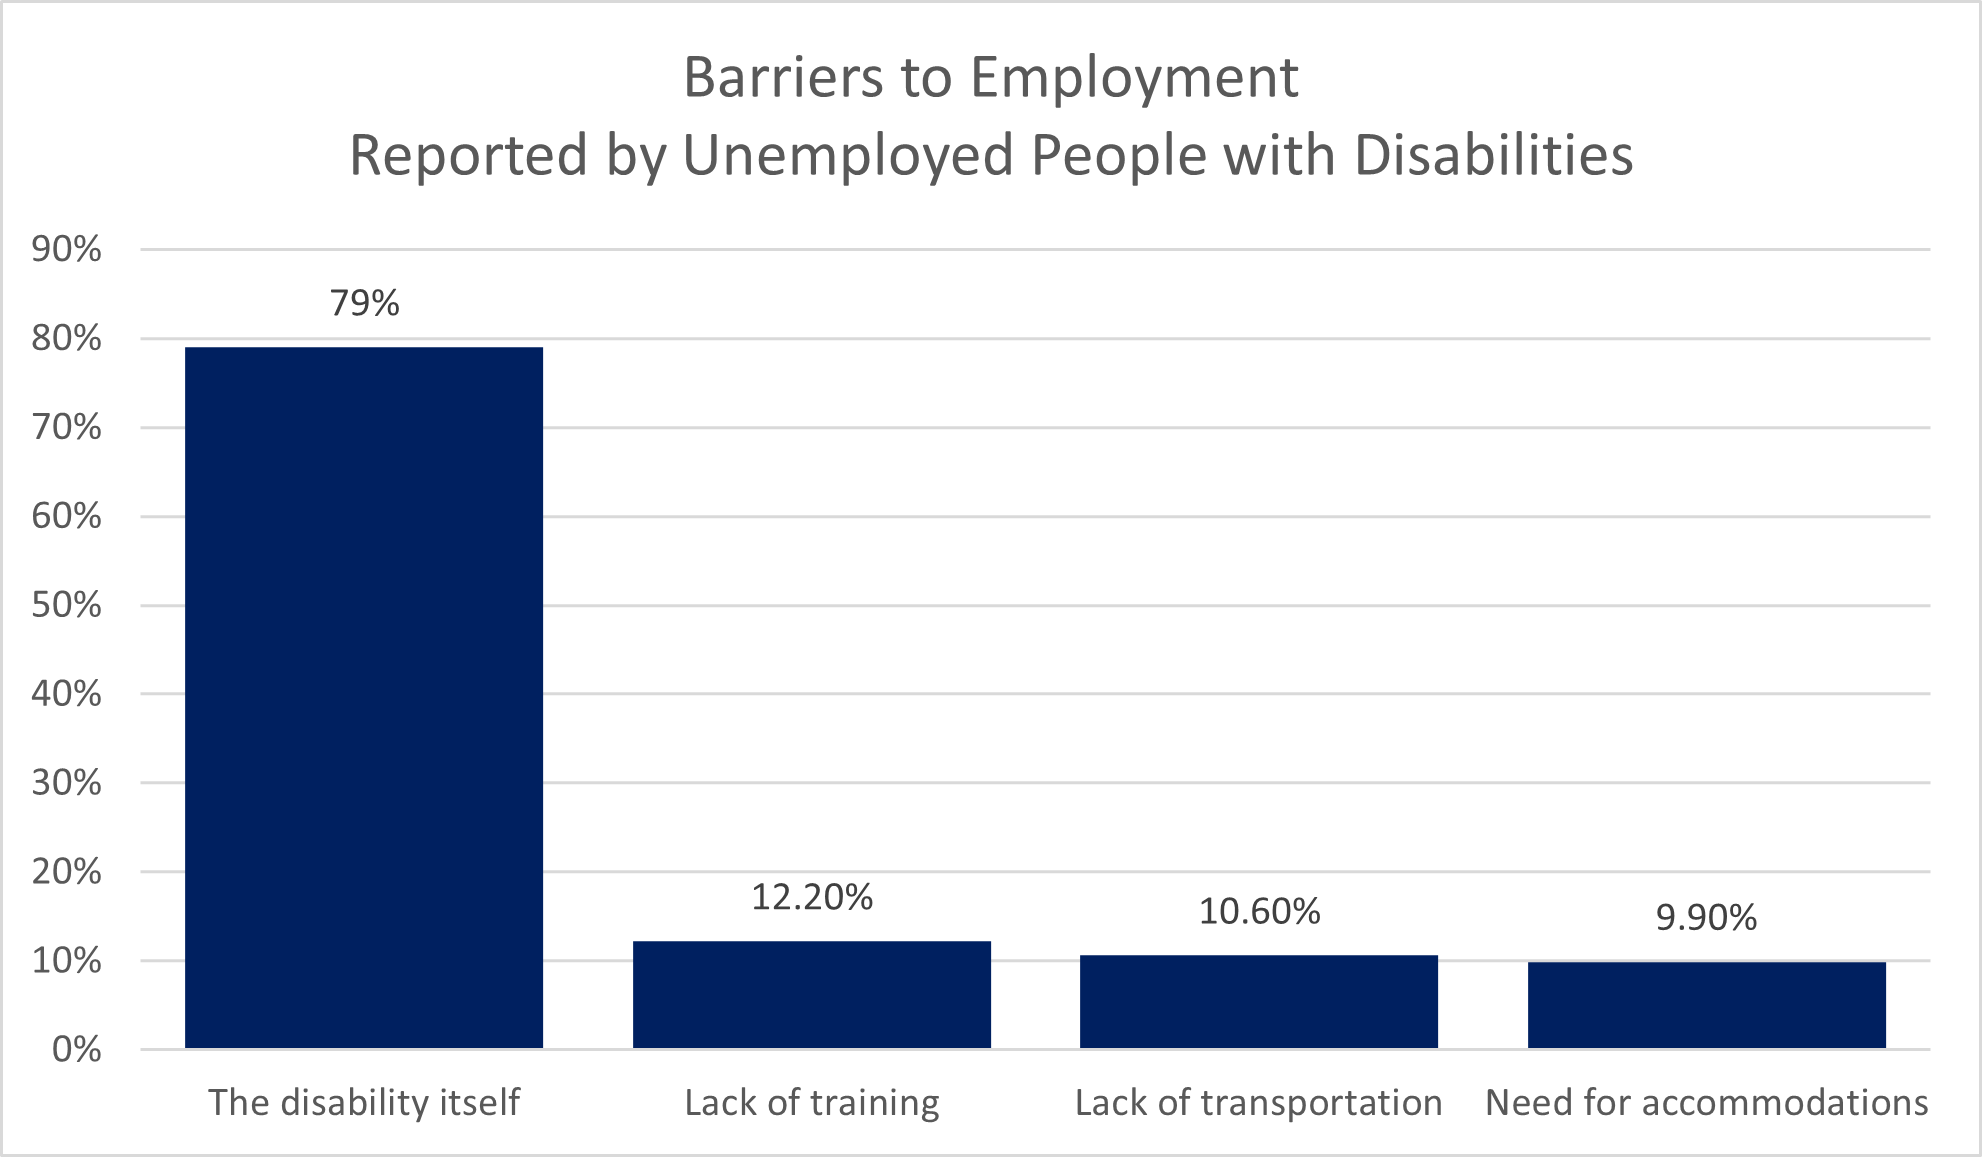 U.S. Bureau of Labor Statistics (BLS): Barriers to Employment Reported by Unemployed People with Disabilities